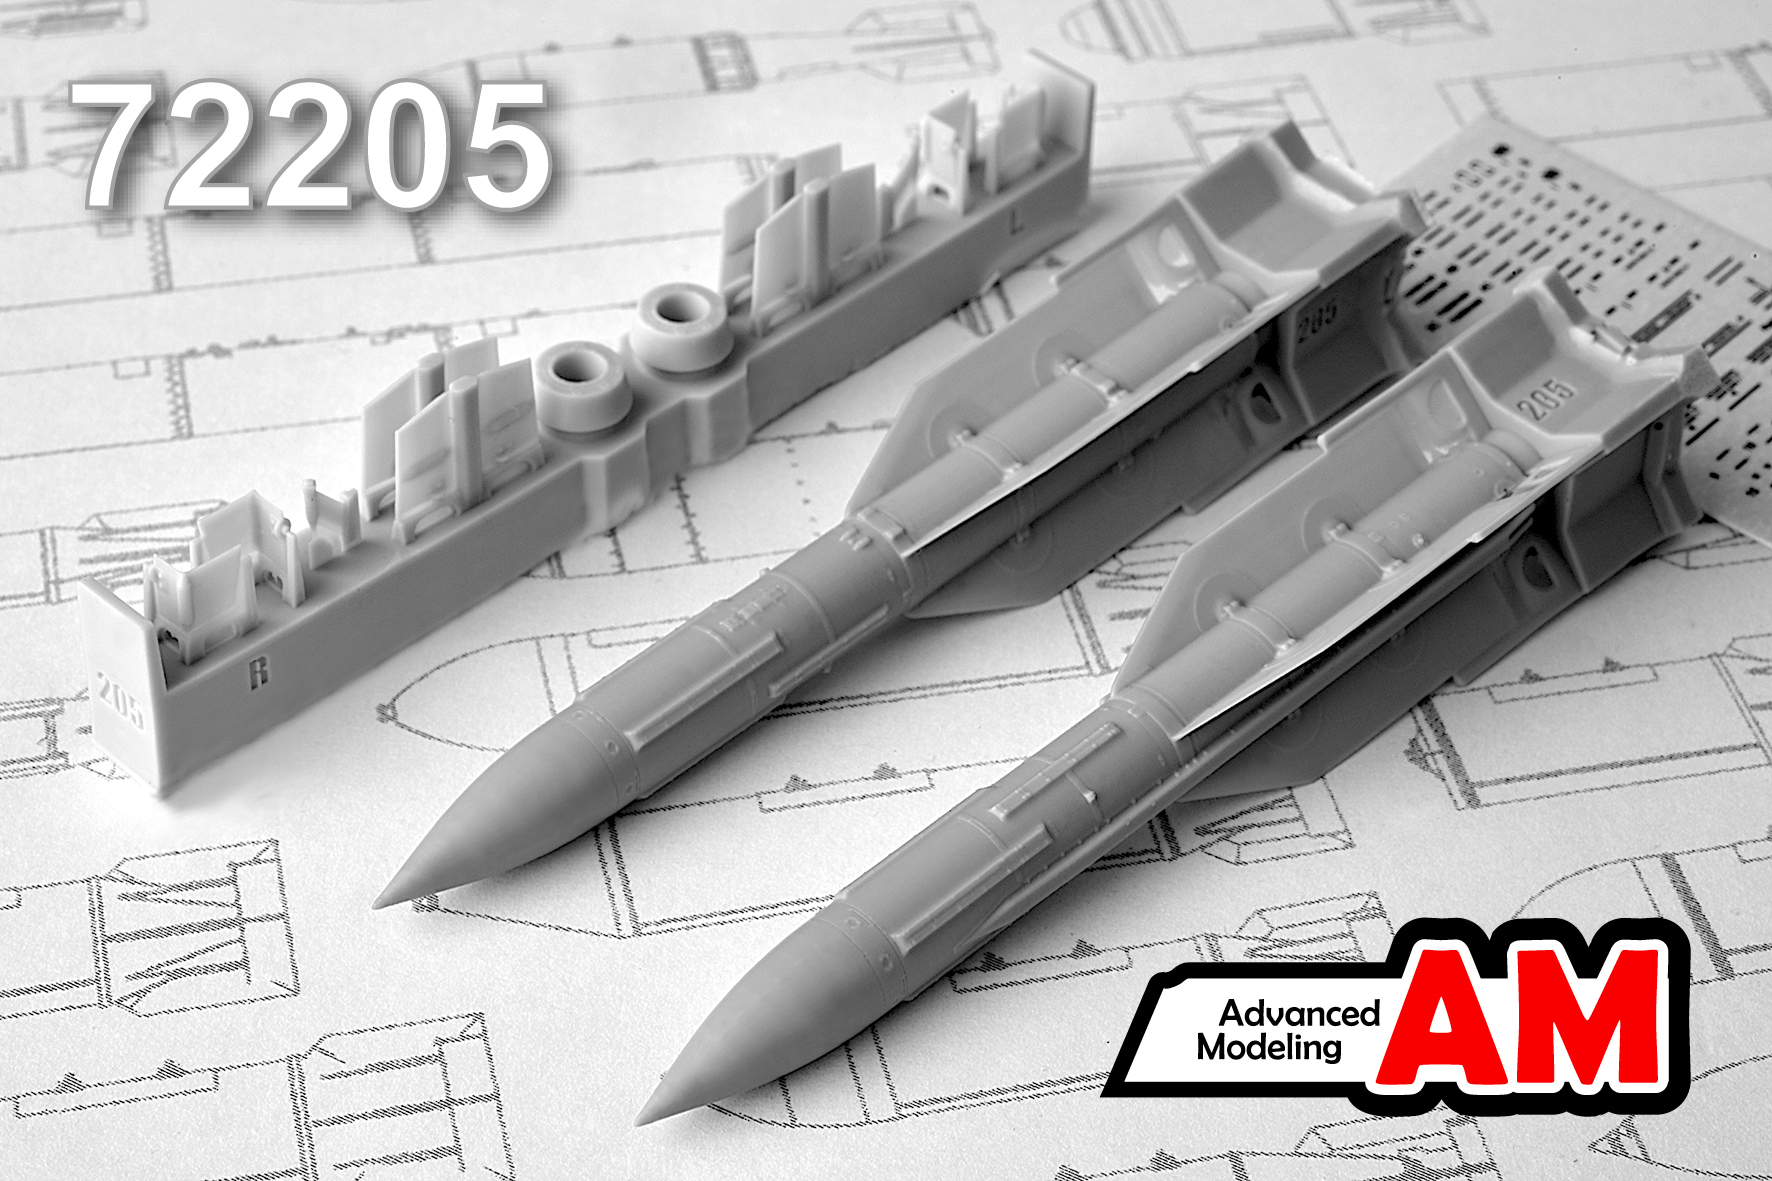 Additions (3D resin printing) 1/72 R-33 Air to Air missile (Advanced Modeling) 